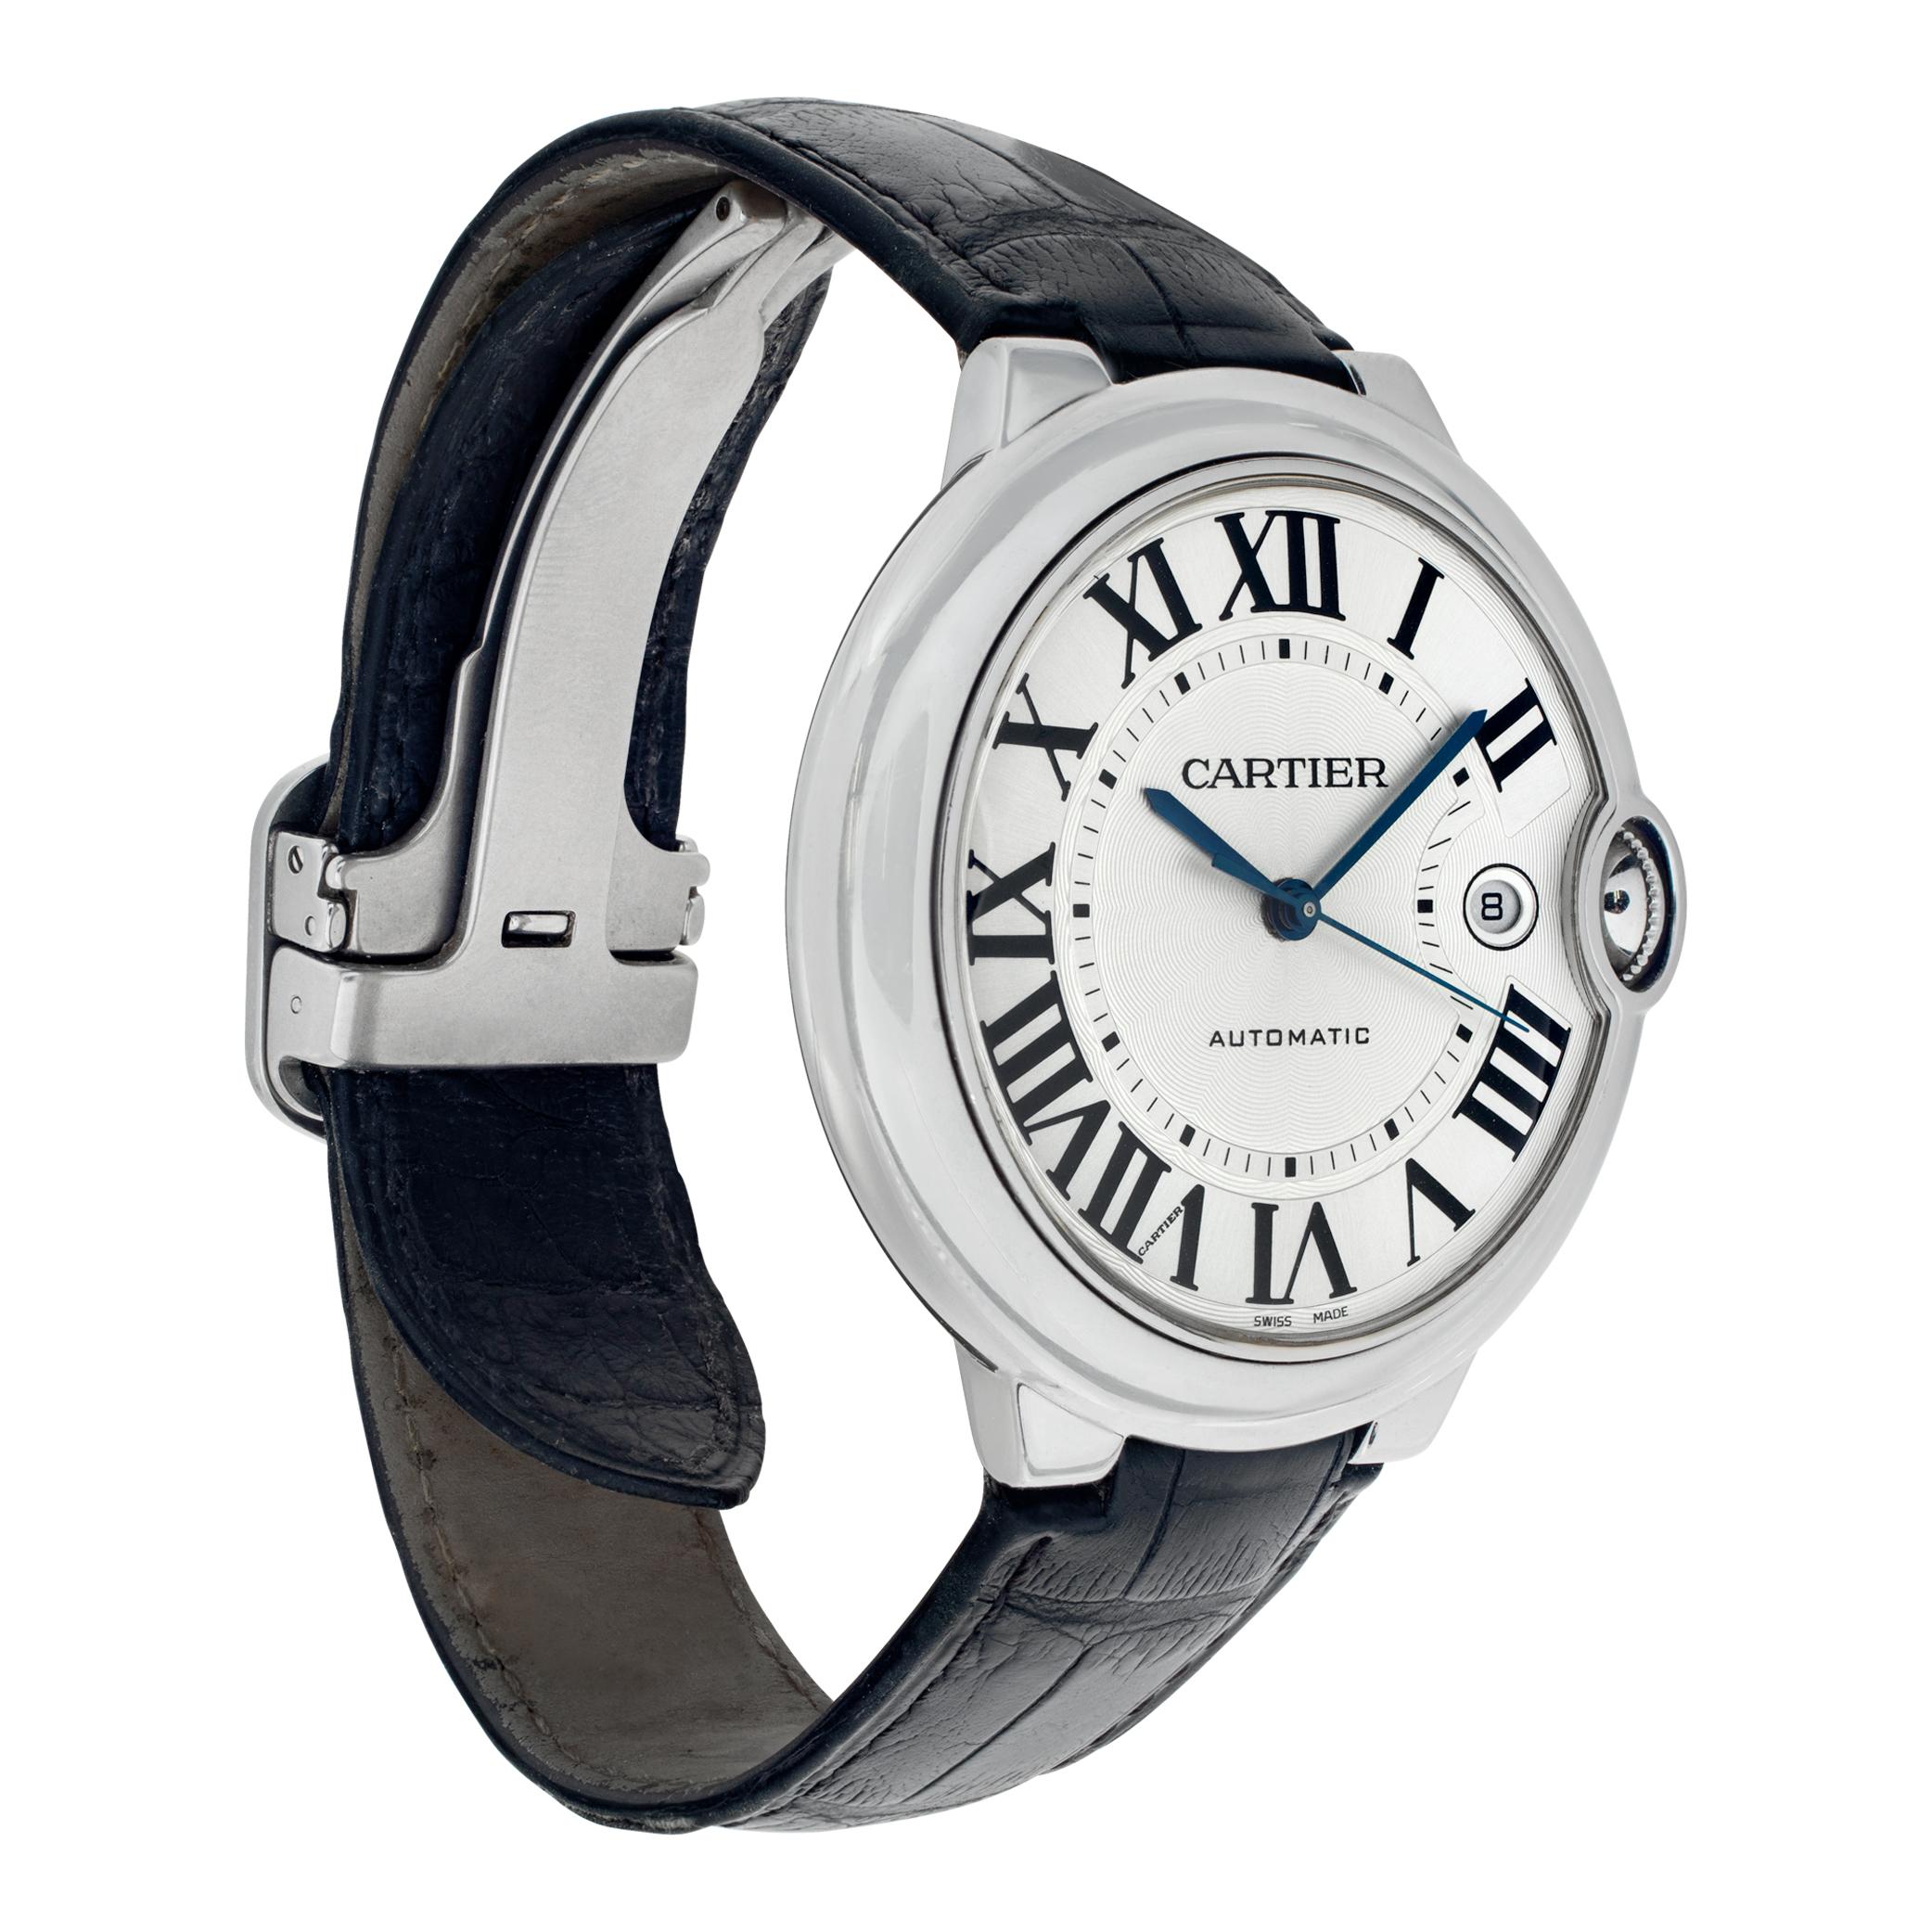 Cartier Ballon Bleu stainless steel Automatic Wristwatch Ref WSBB0026 In Excellent Condition For Sale In Surfside, FL